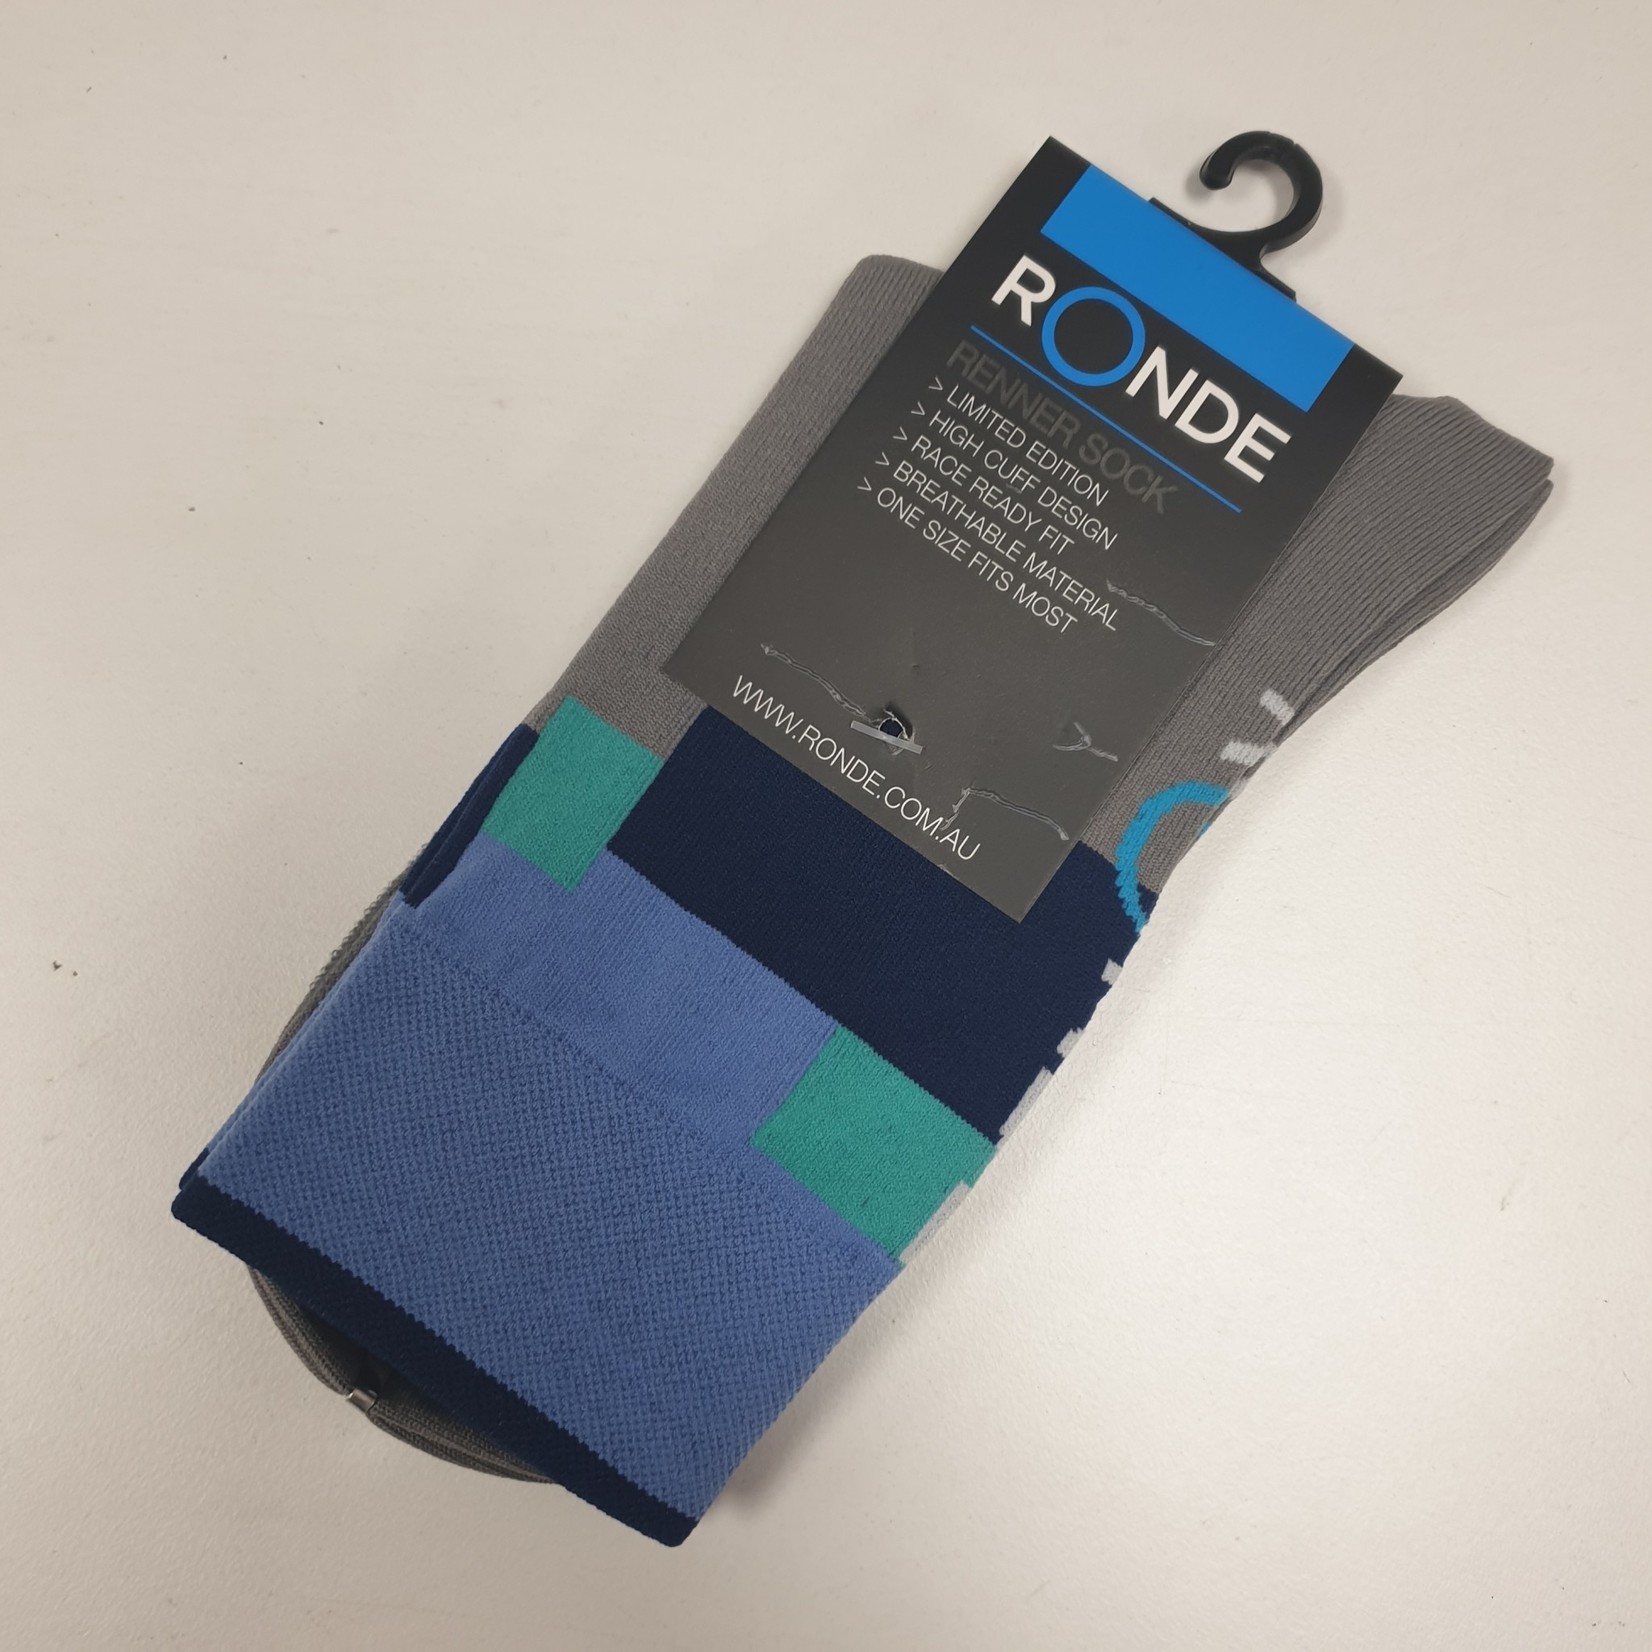 Ronde Renner Cycling Socks